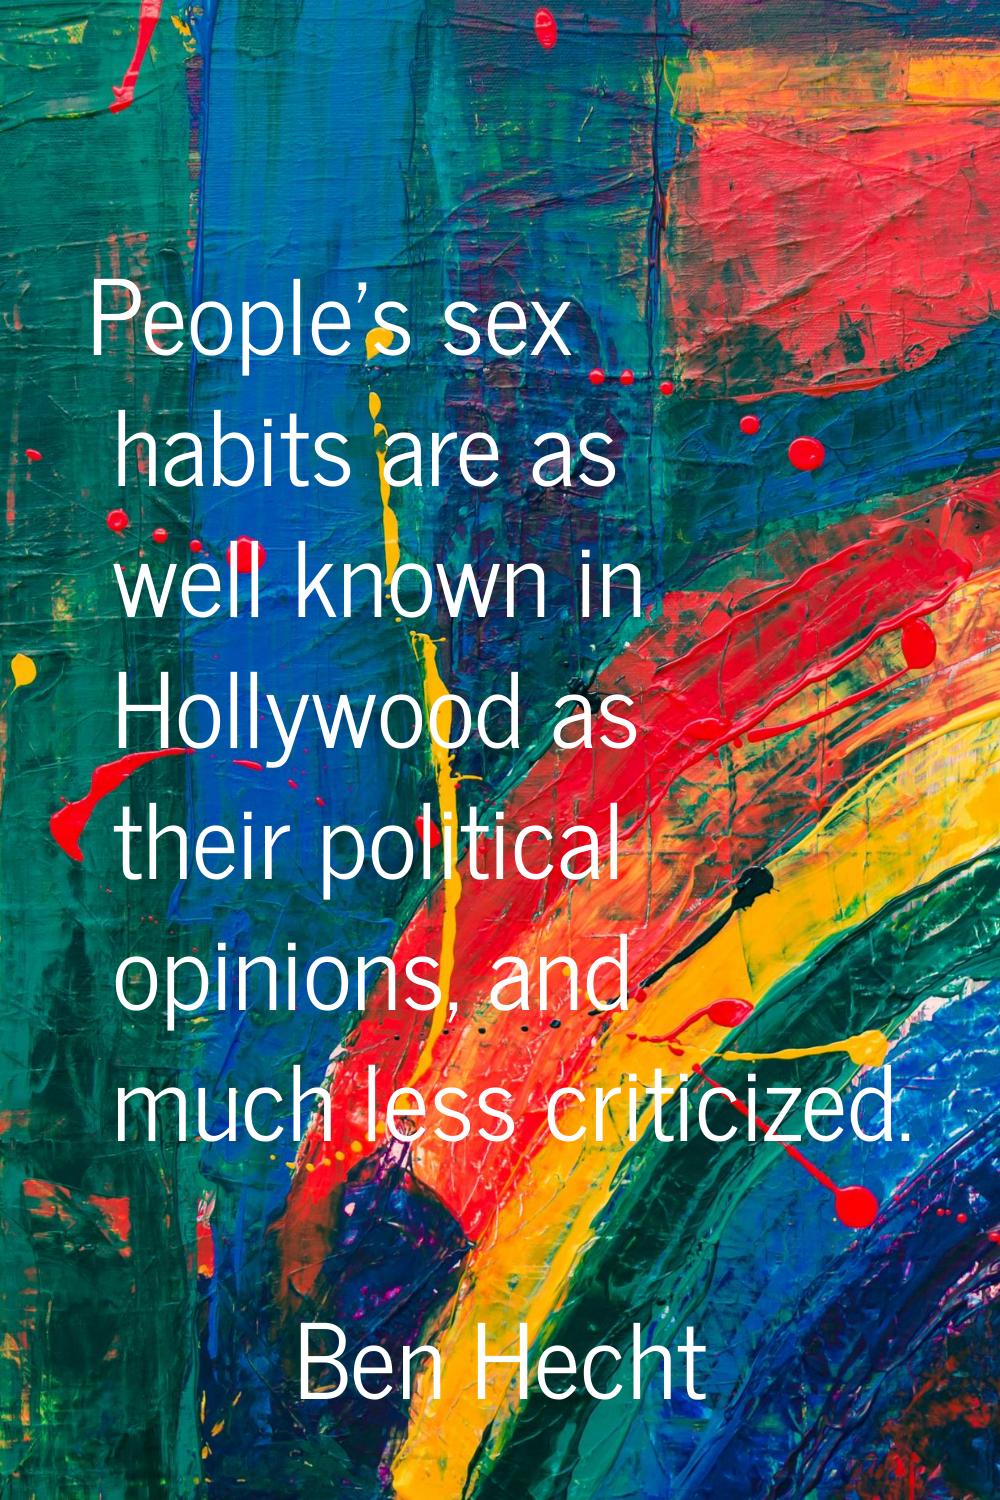 People's sex habits are as well known in Hollywood as their political opinions, and much less criti